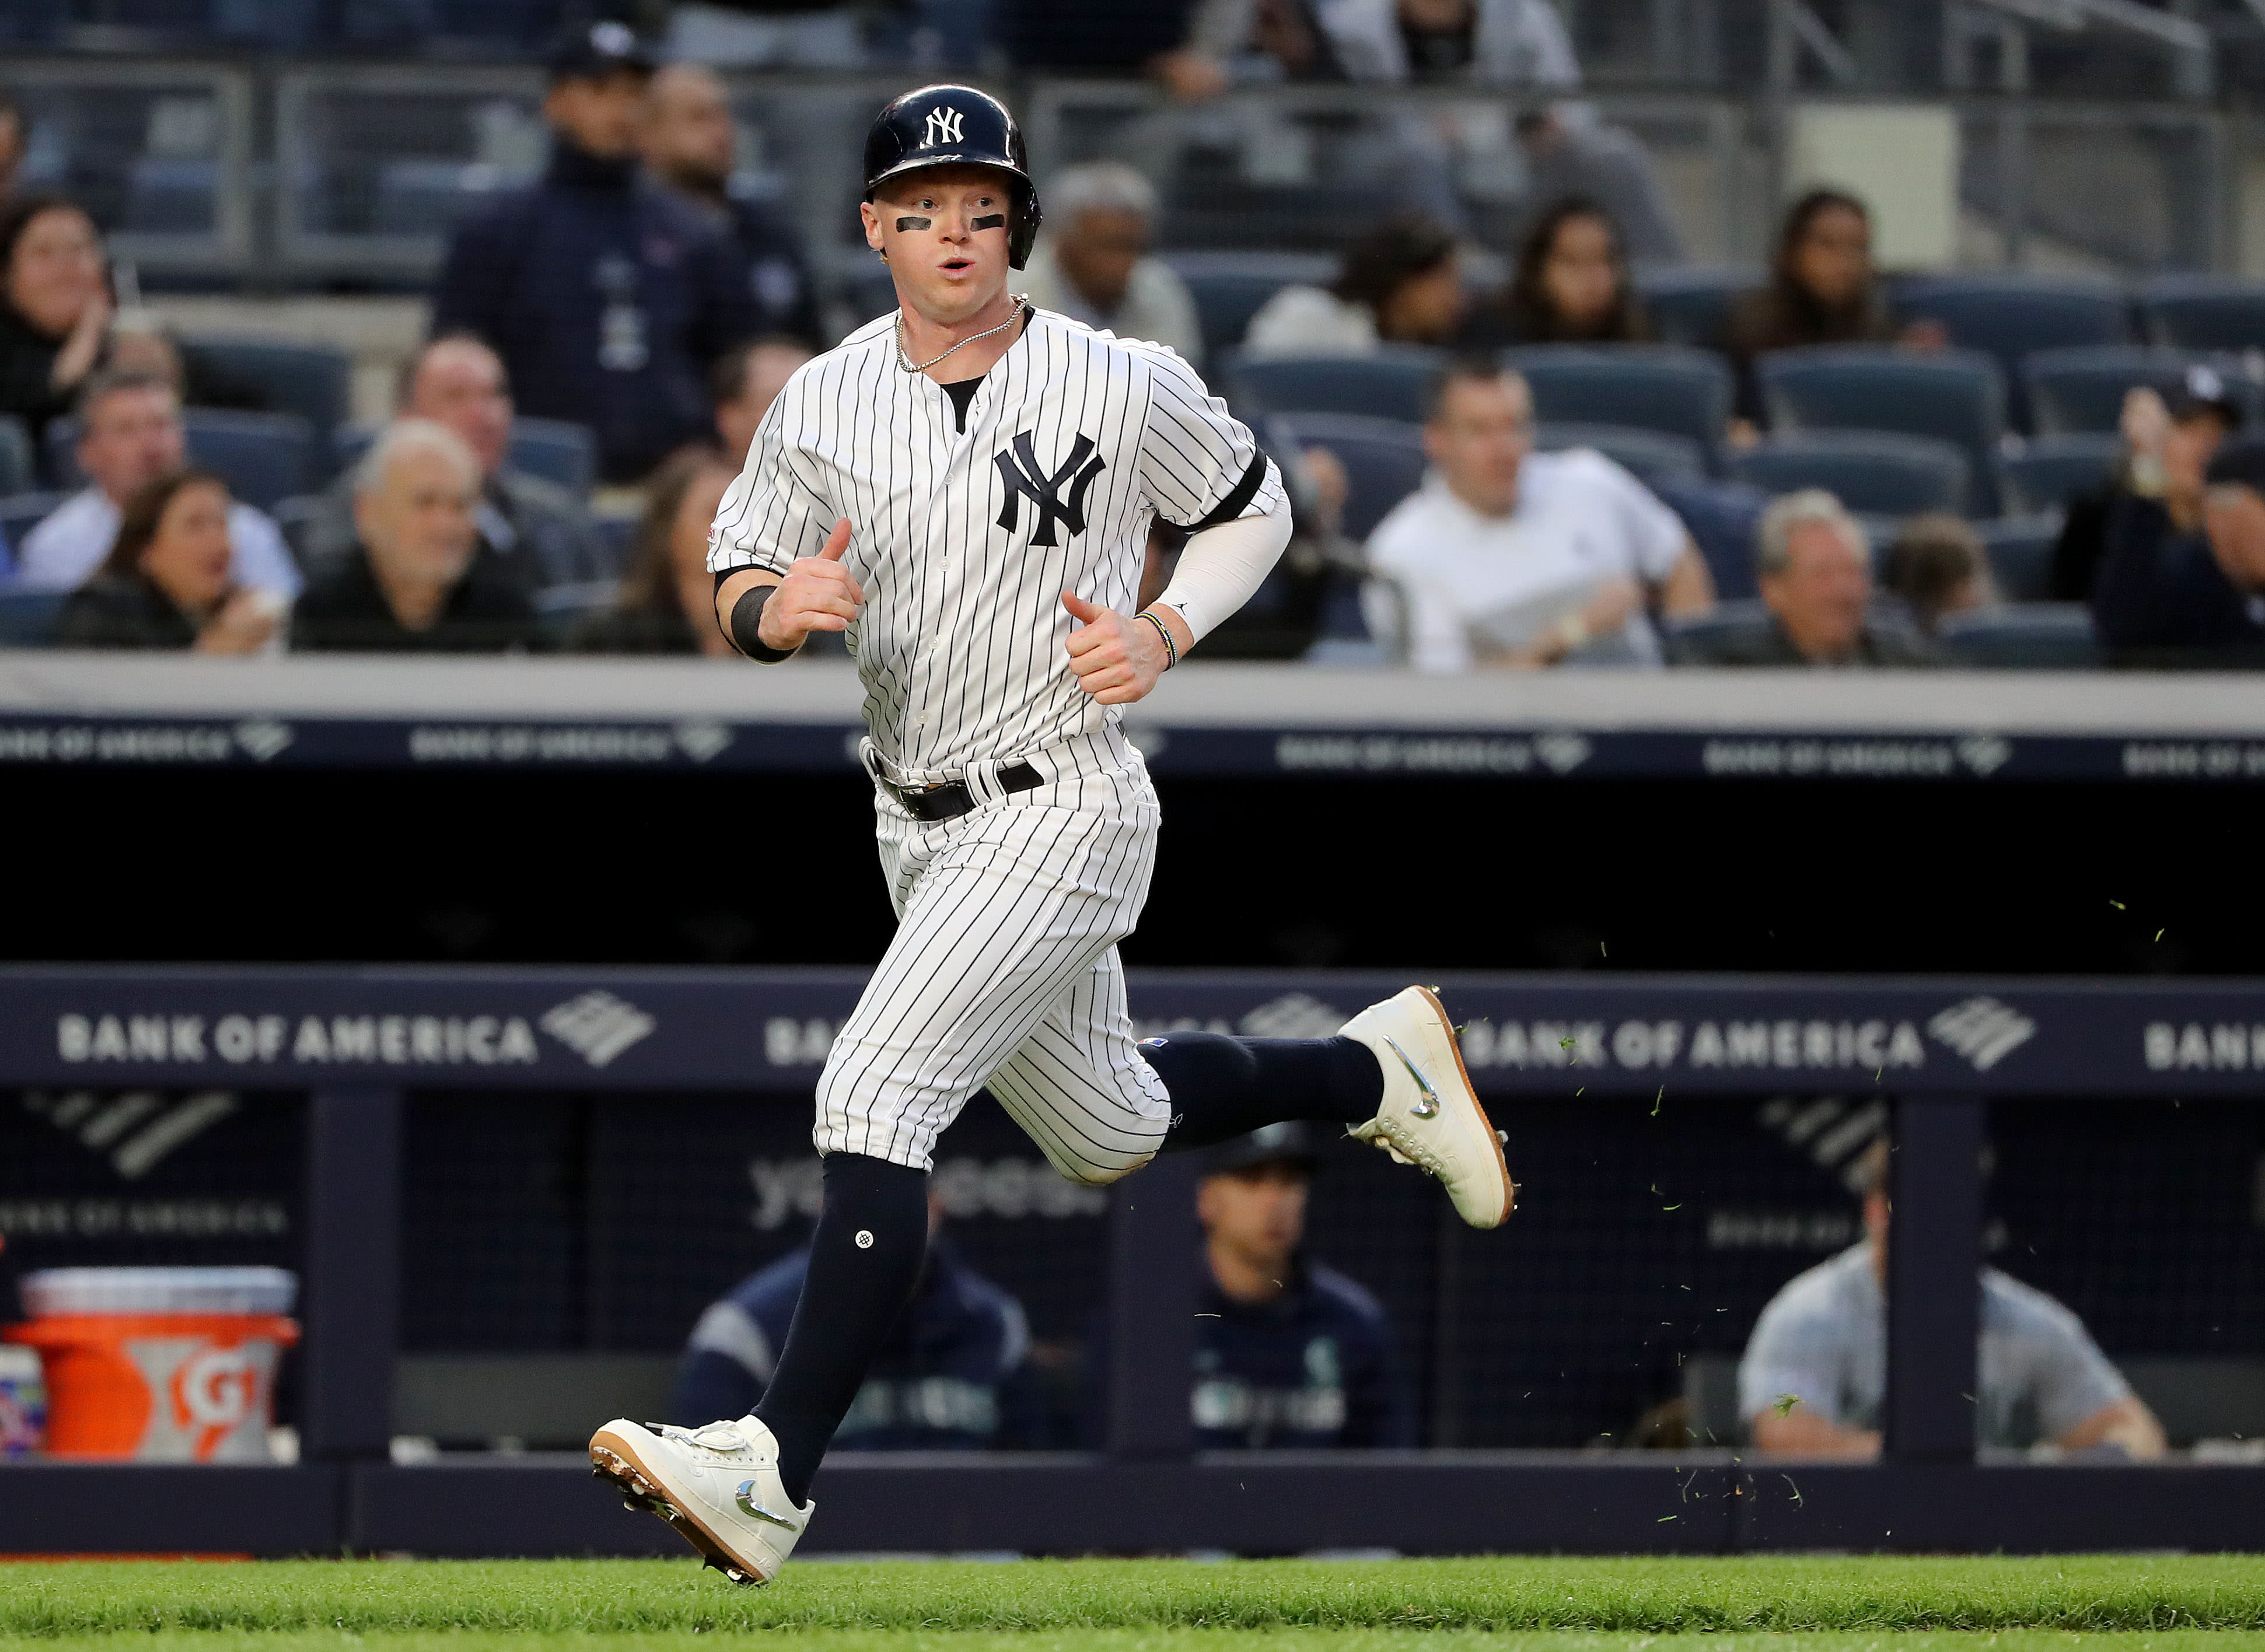 Clint Frazier puts cats on Mother's Day cleats